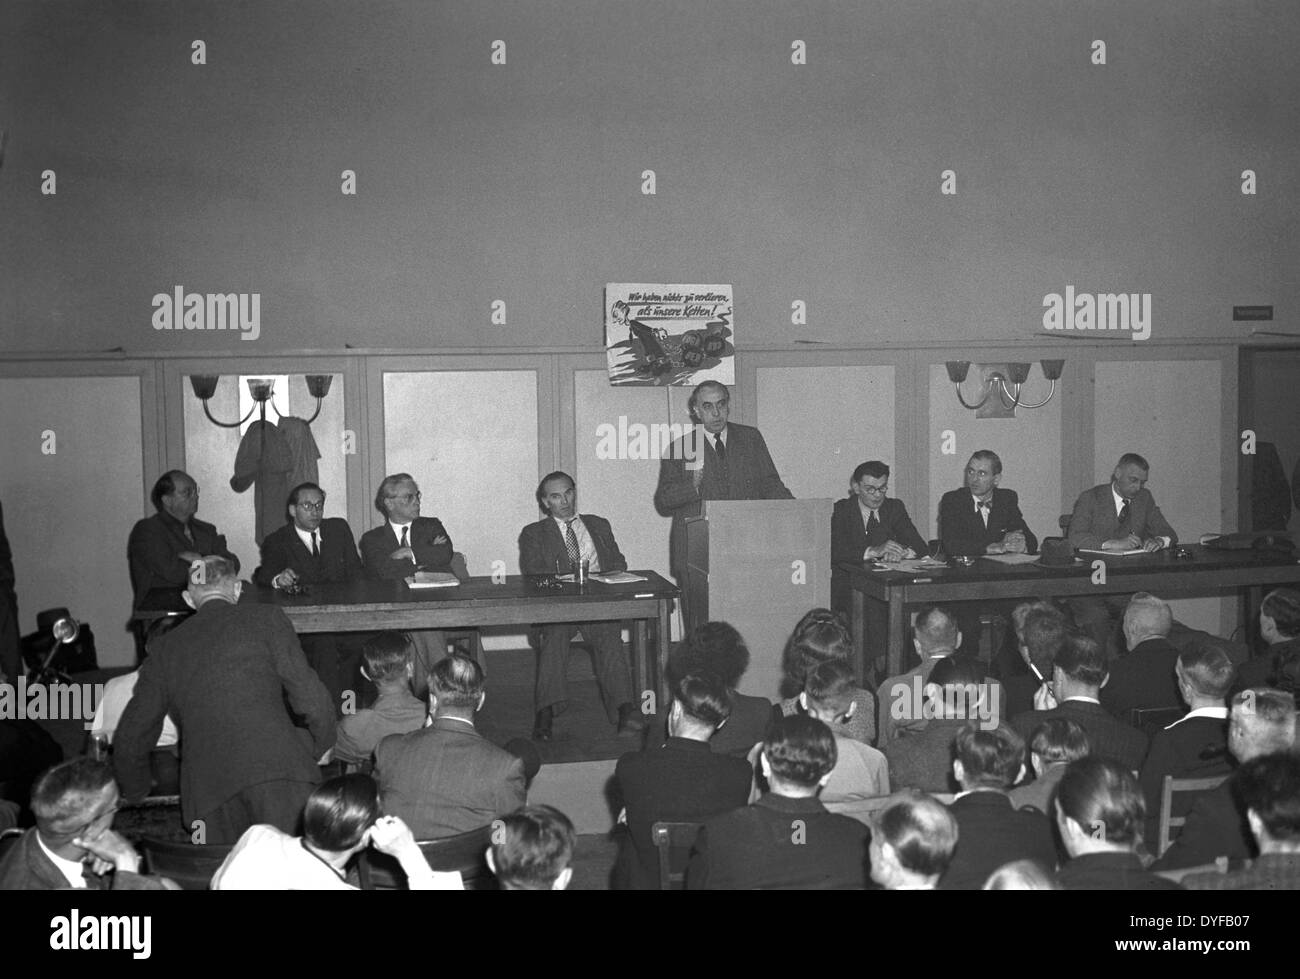 The Mayor of East Berlin, Ernst Reuter, tries to mediate between the Unabhängige Gewerkschaftsopposition (UGO) and the East German State Railway - here he talks to officials of the UGO. The whole railway operations and infrastructure of Berlin were subordinated to the East German State Railway (Deutsche Reichsbahn, DR) of the Soviet zone of occupation until 1949. On 21 May 1949, the Unabhängige Gewerkschaftsopposition UGO in the West sectors called upon to strike. Around 13.000 Reichsbahner (workers of the East German State Railway) living in West Berlin stopped work and fought for a payment i Stock Photo